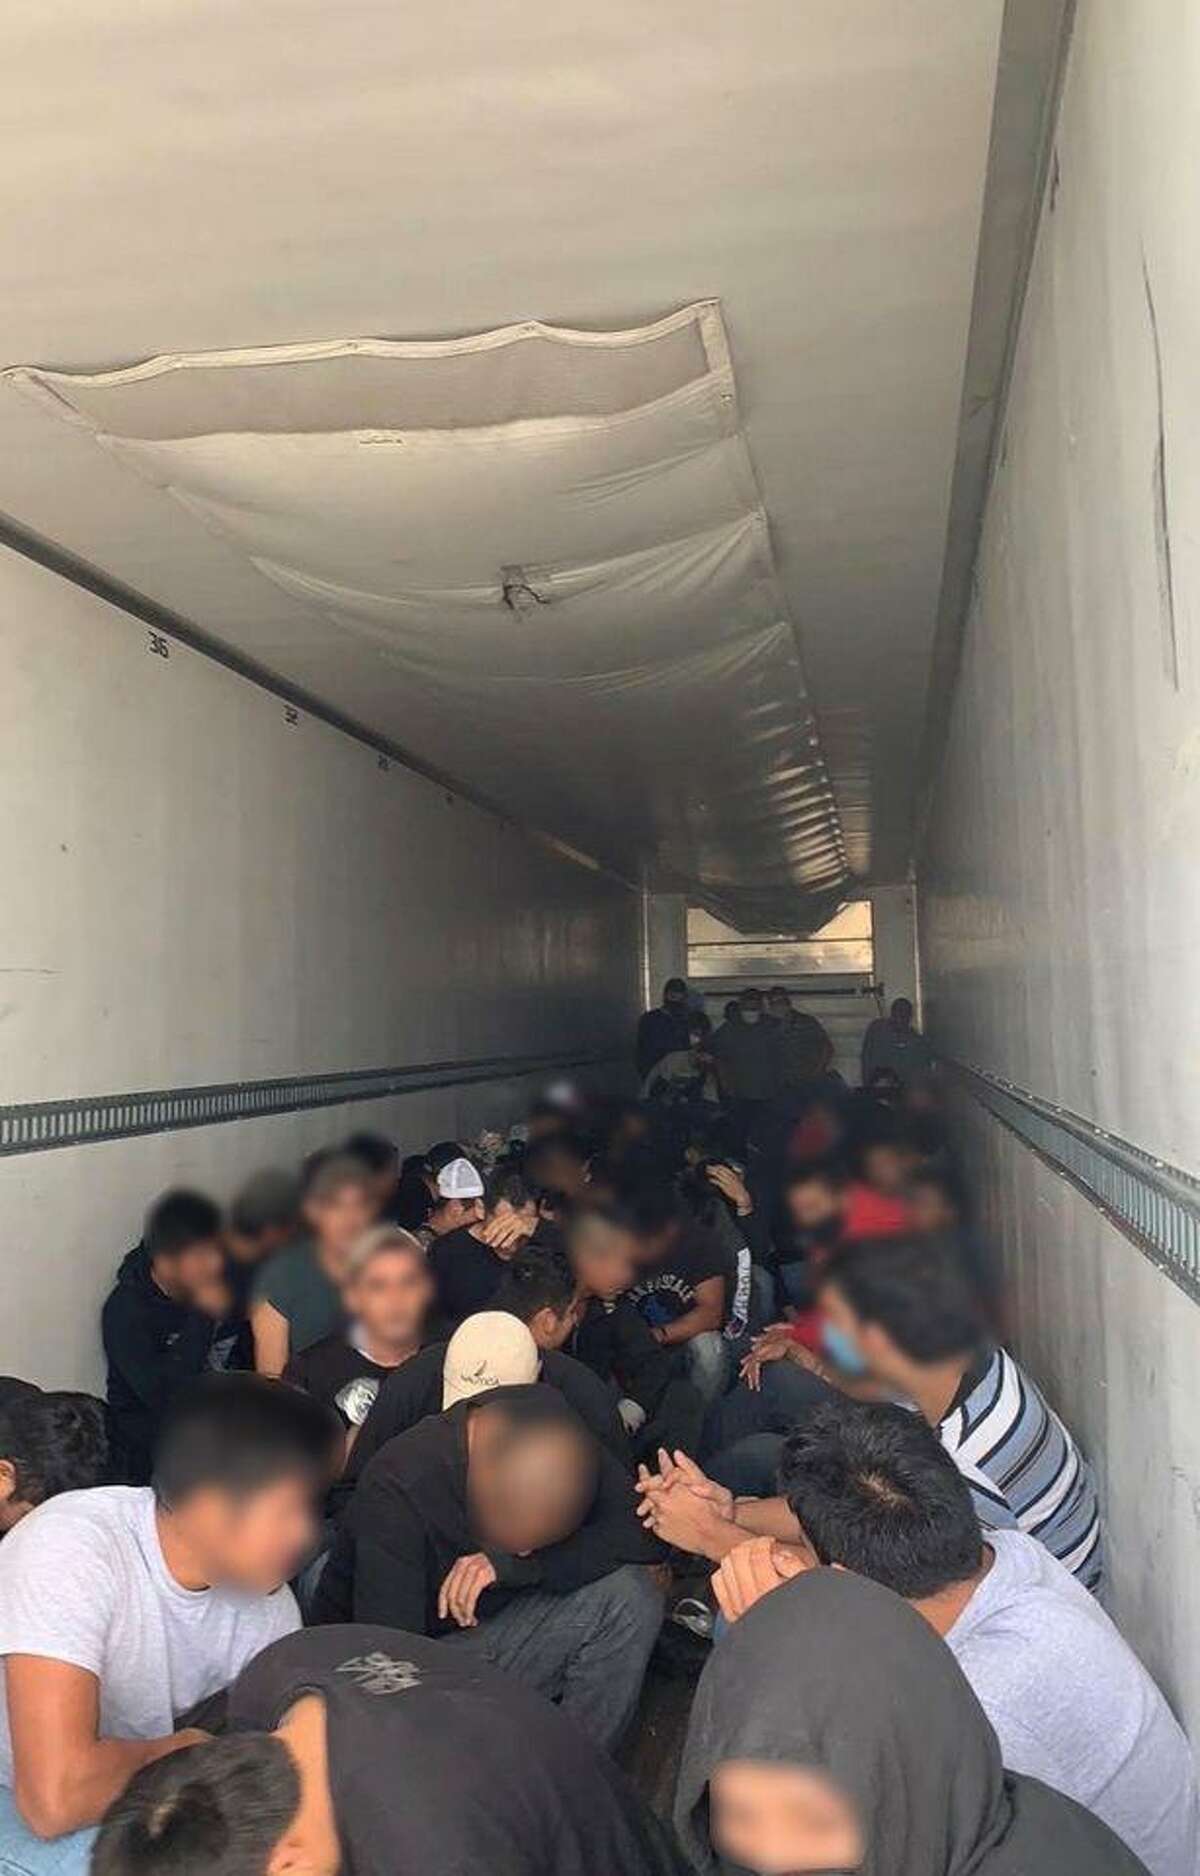 U.S. Border Patrol agents said they discovered 100 people in the back of a refrigerated trailer. Authorities determined that all were immigrants who had crossed the border illegally.